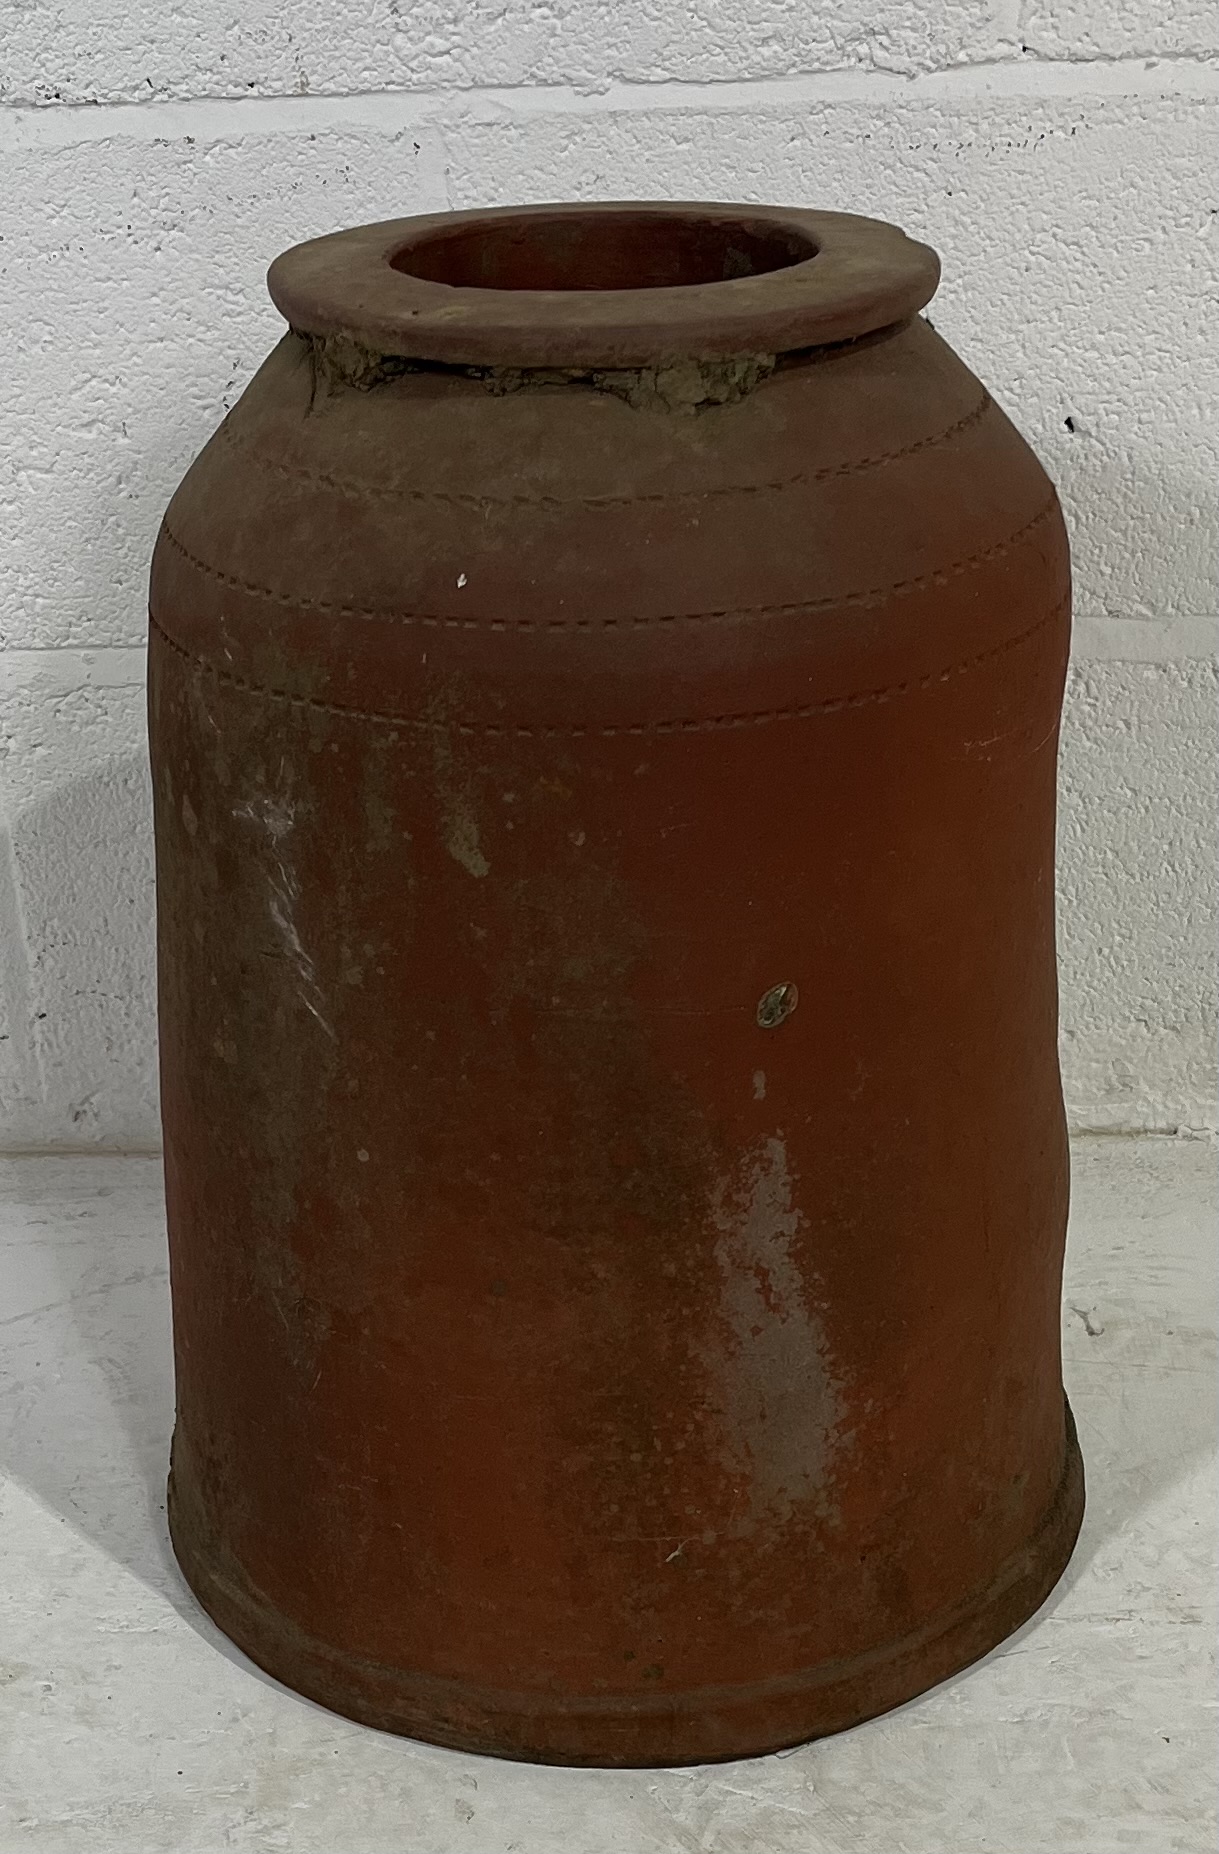 A vintage terracotta weathered rhubarb forcer